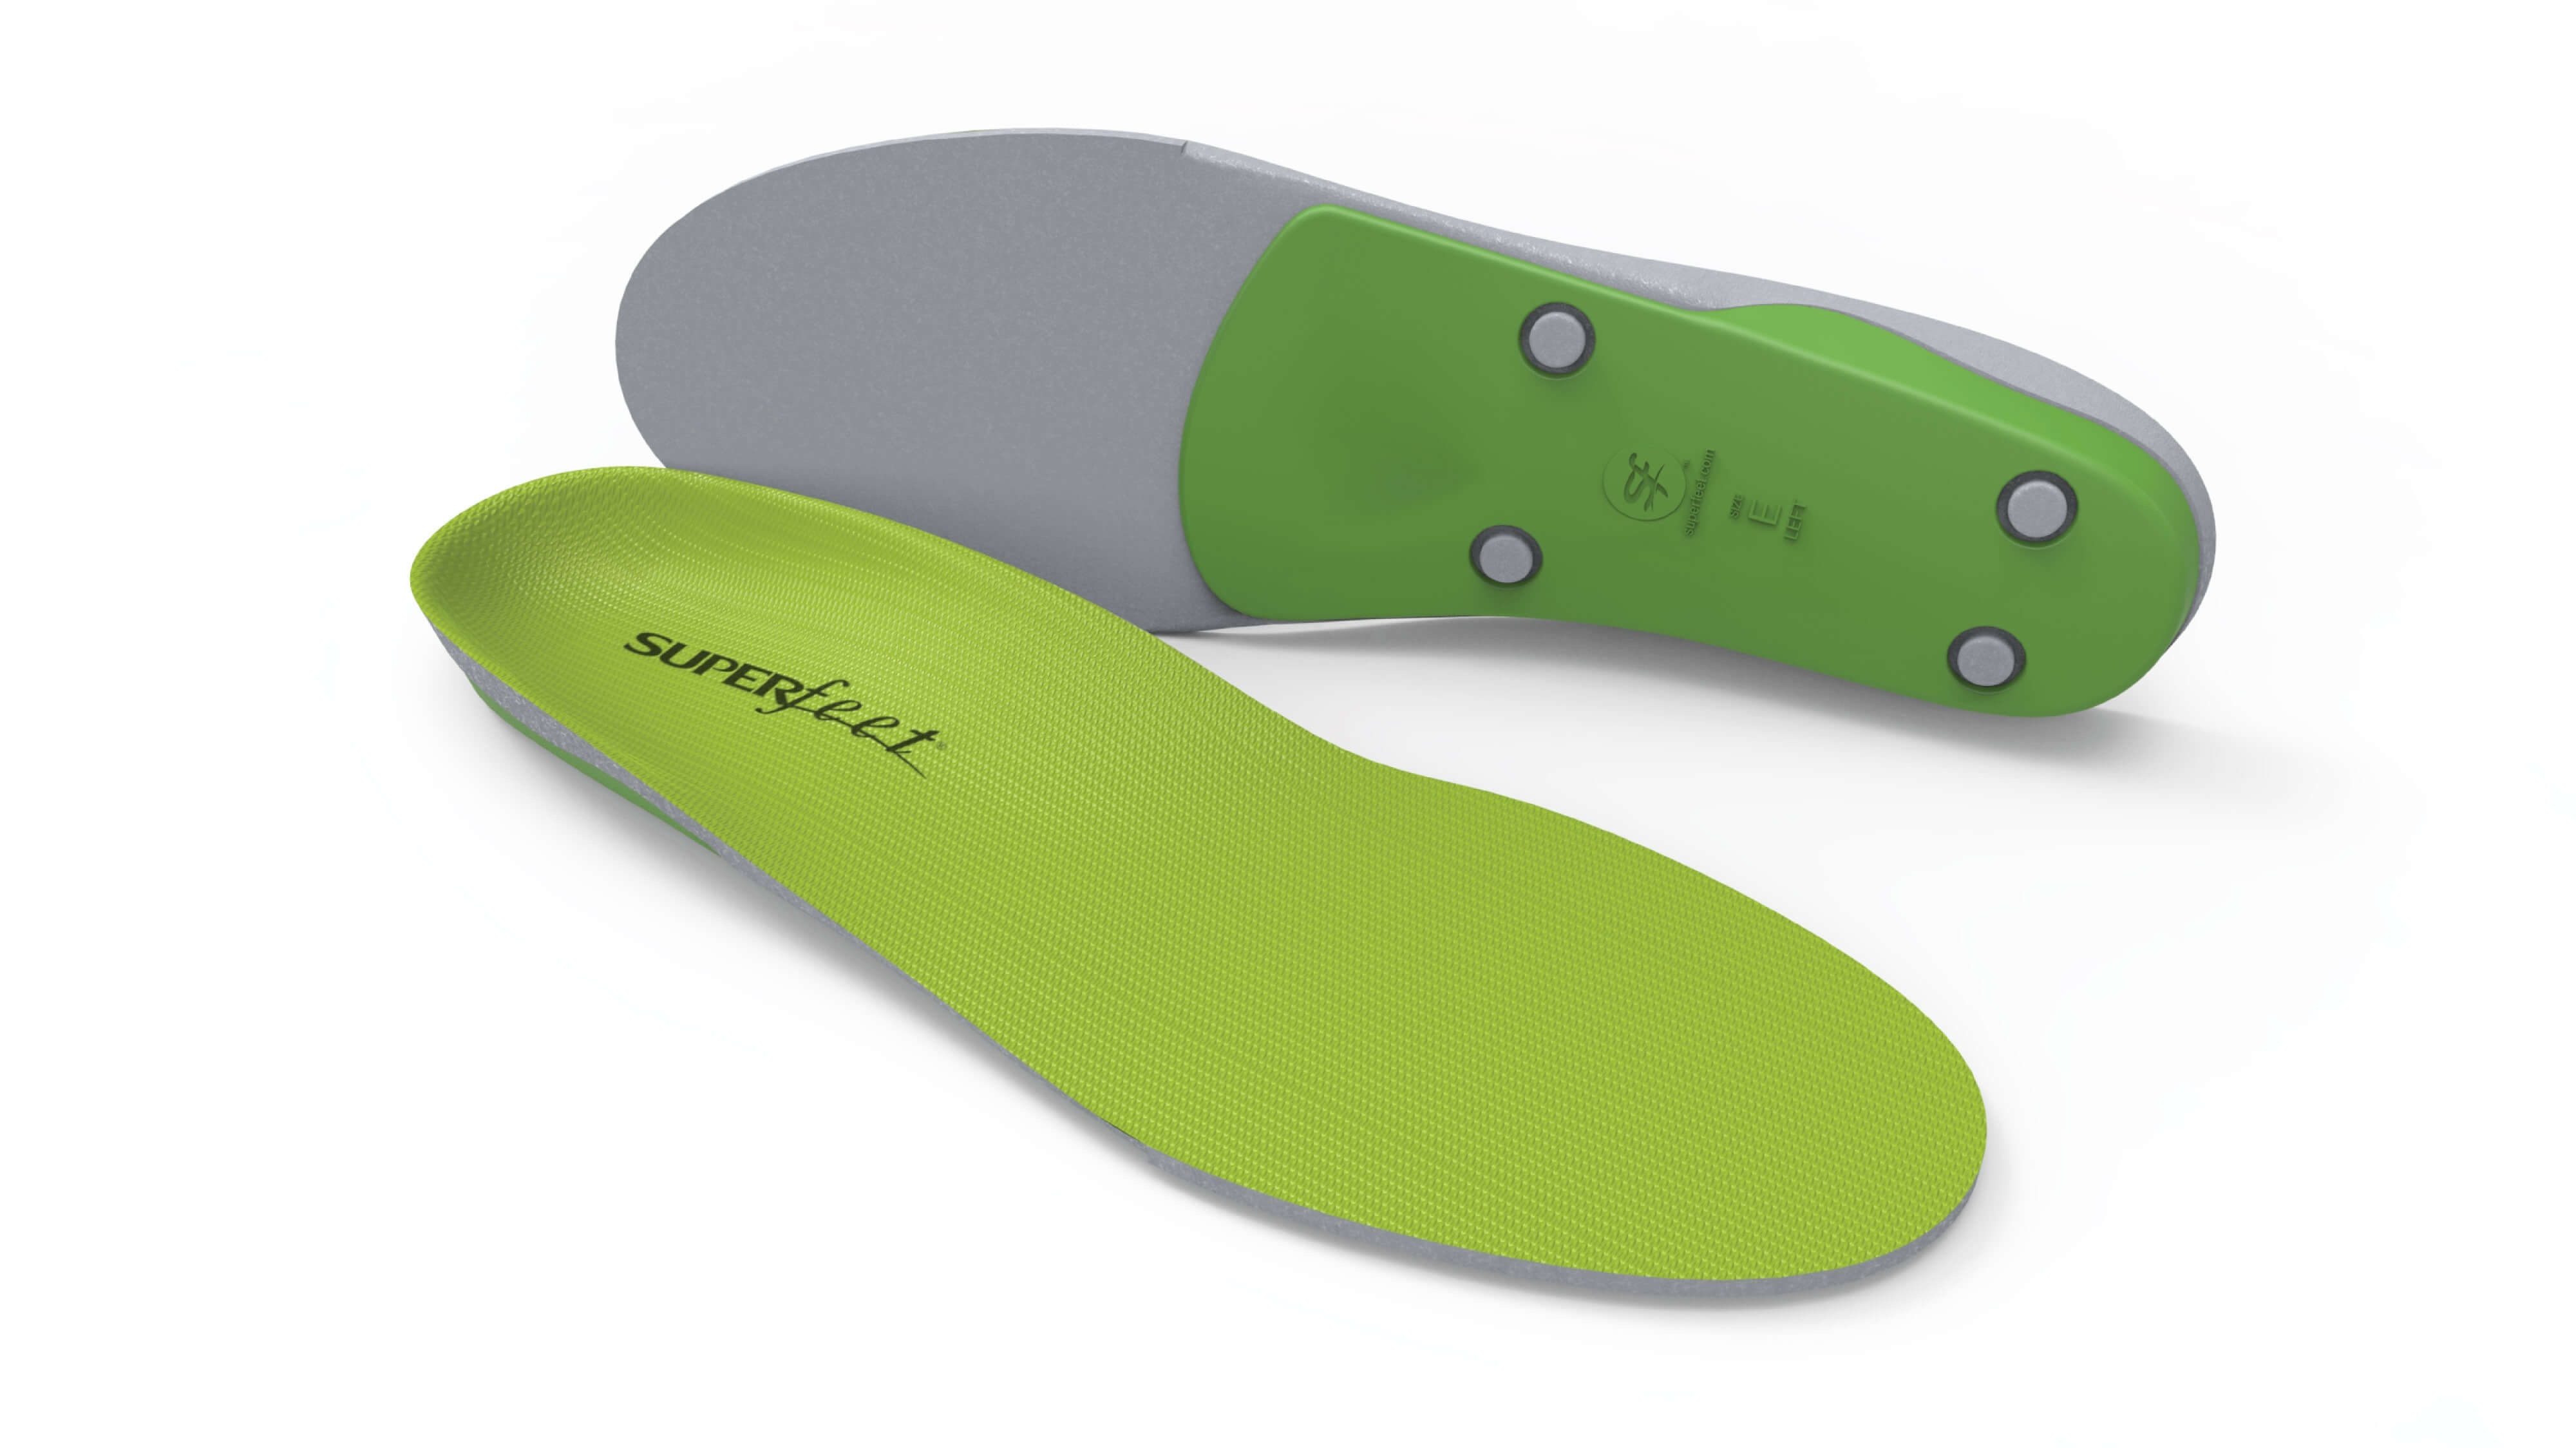 Foot Insoles Market Size Globally 2019-2024 | Statistic